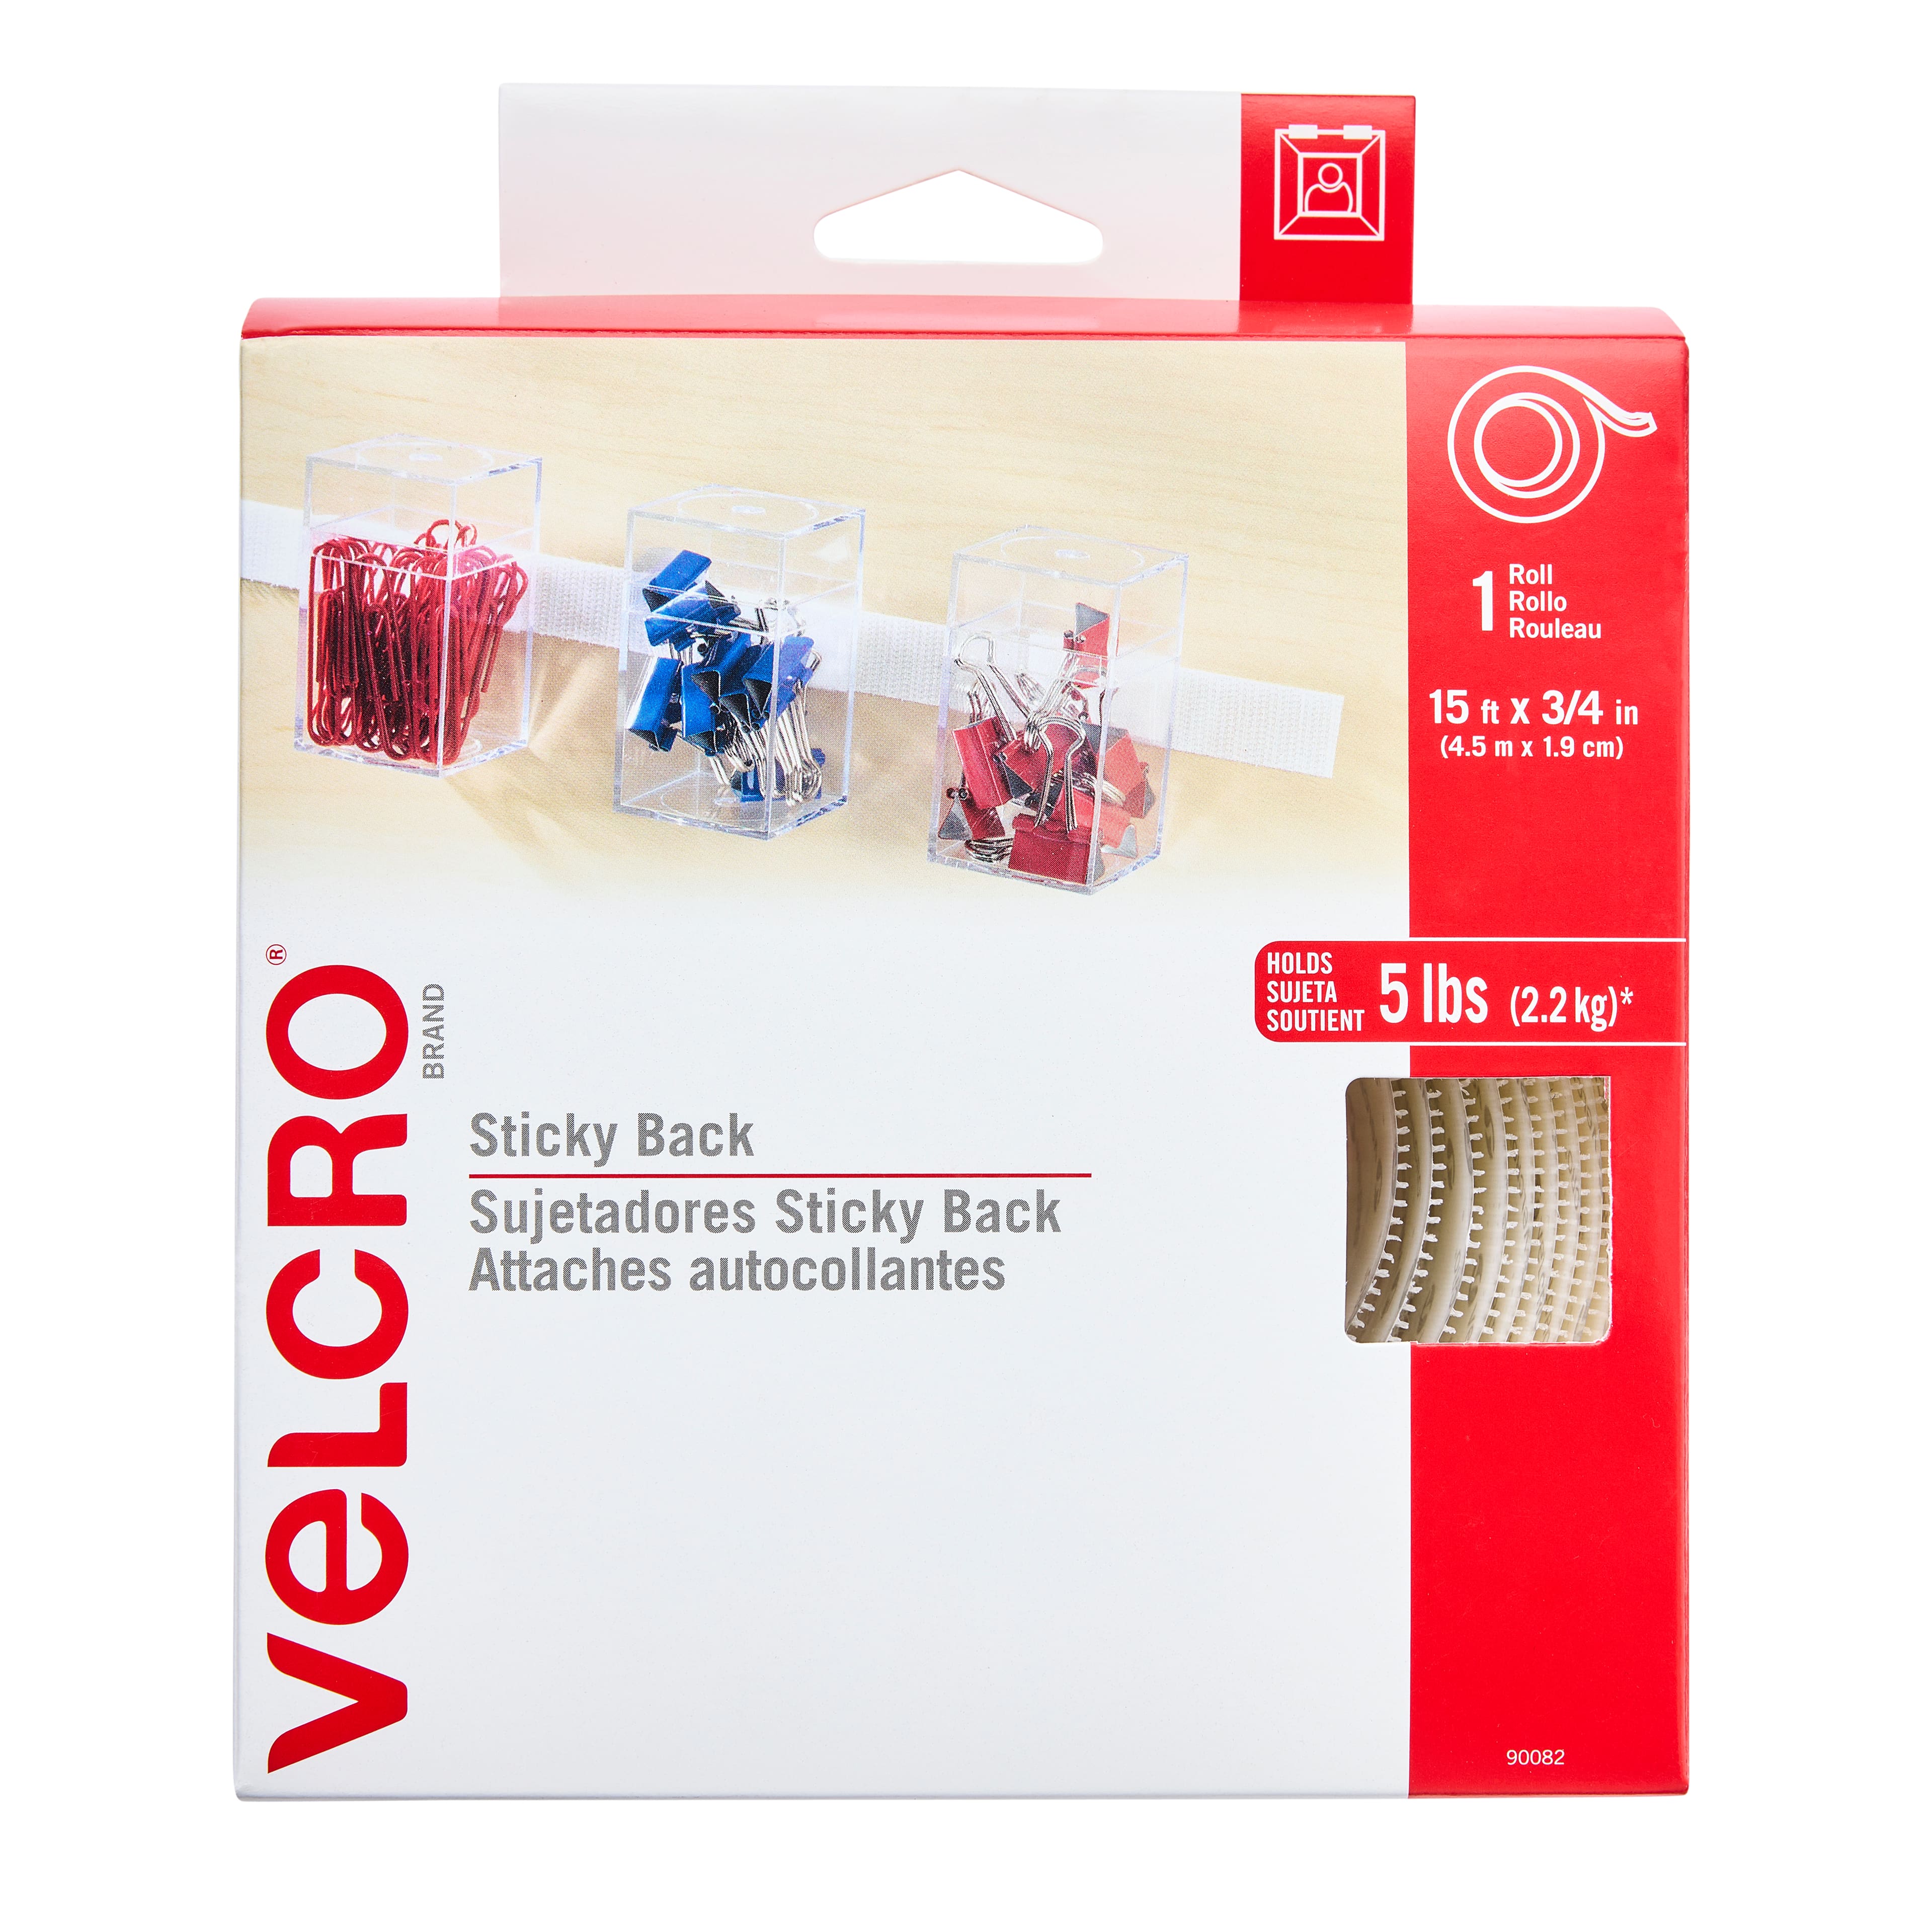 VELCRO® Brand Adhesive Circles On A Roll